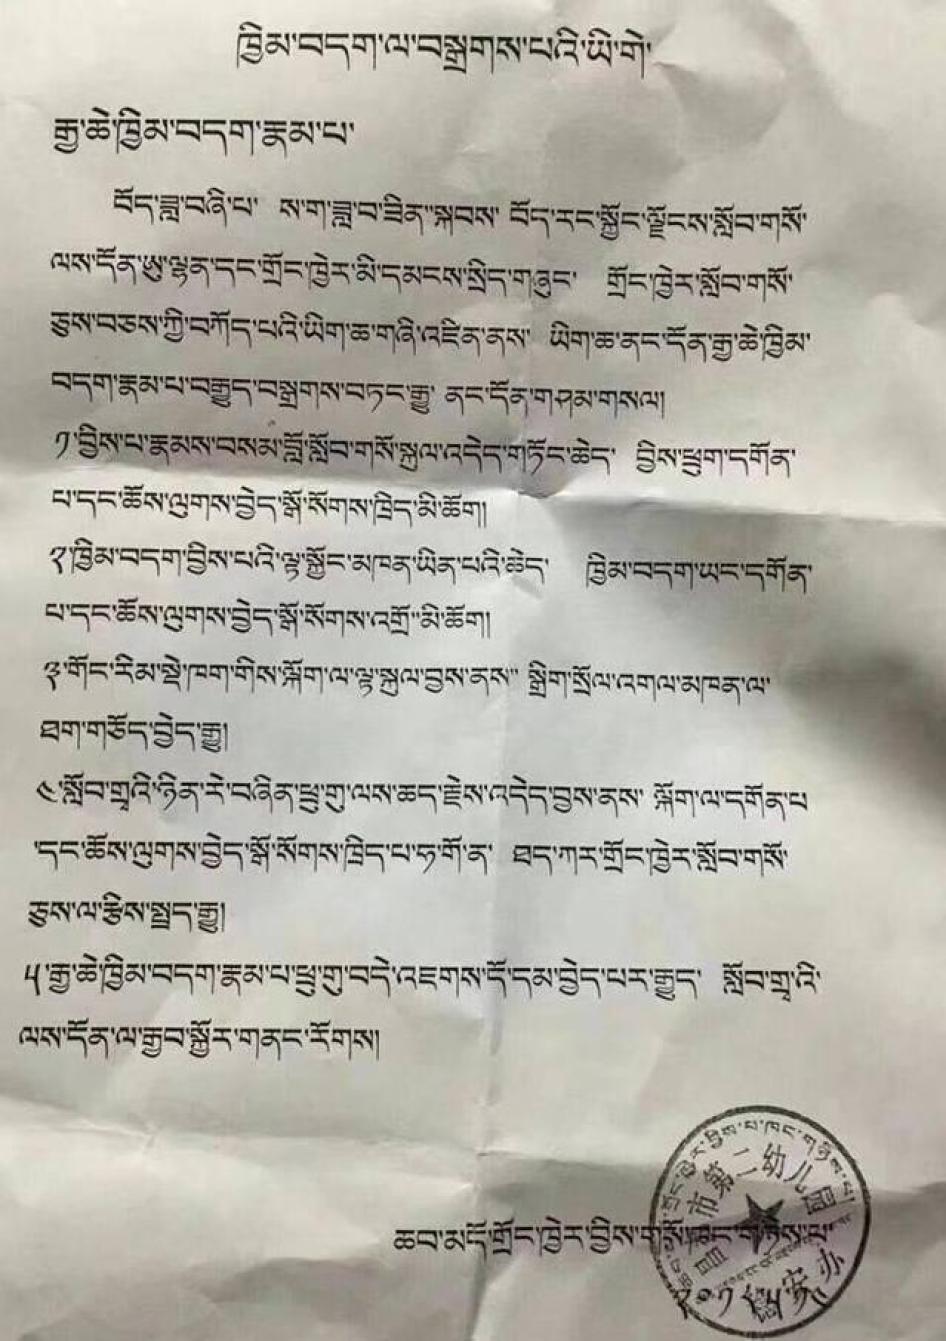 A school notice, issued on May 14, 2018, in Chamdo, warns parents that, “if your children miss any days of school, and are later found to have been secretly taken to a monastery or religious festival, your family will be reported directly to the city educ